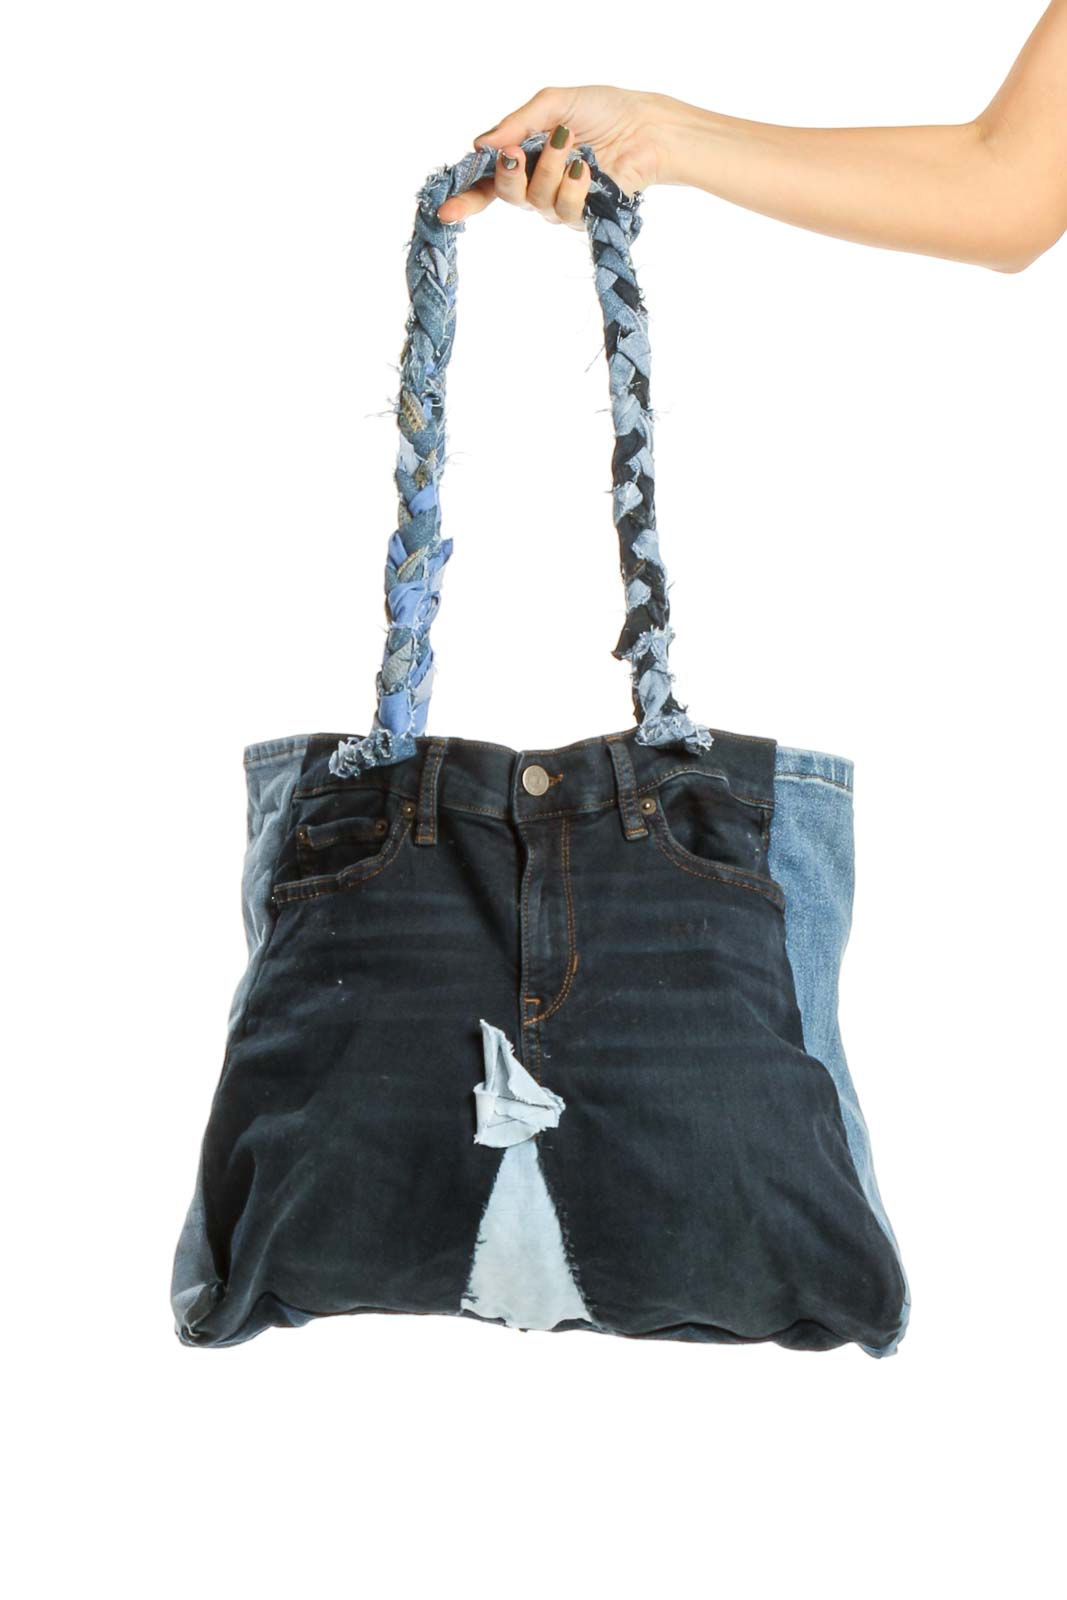 Reworked: Blue Denim Tote Bag with Side Pockets From Donated Denim Front